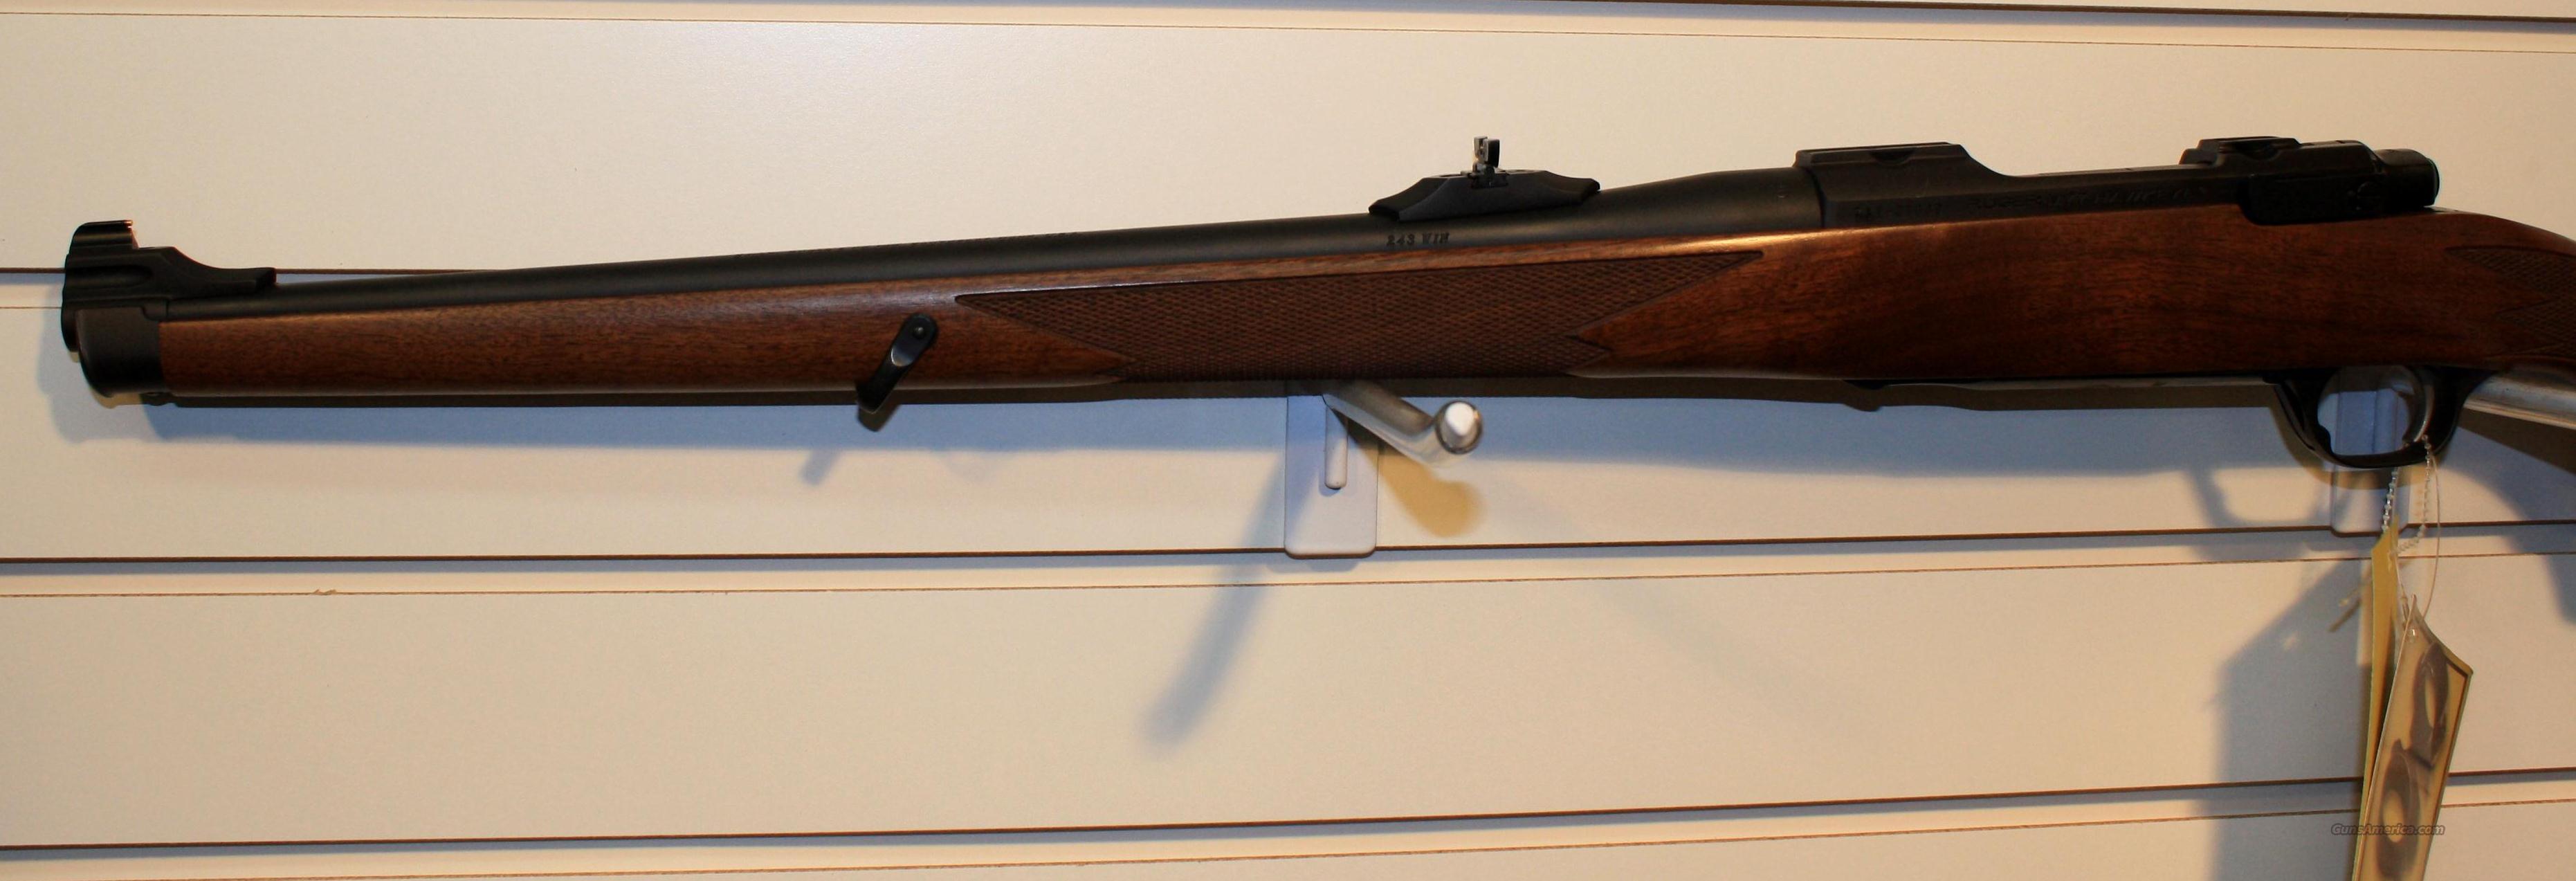 ruger m77 243 replacement stock